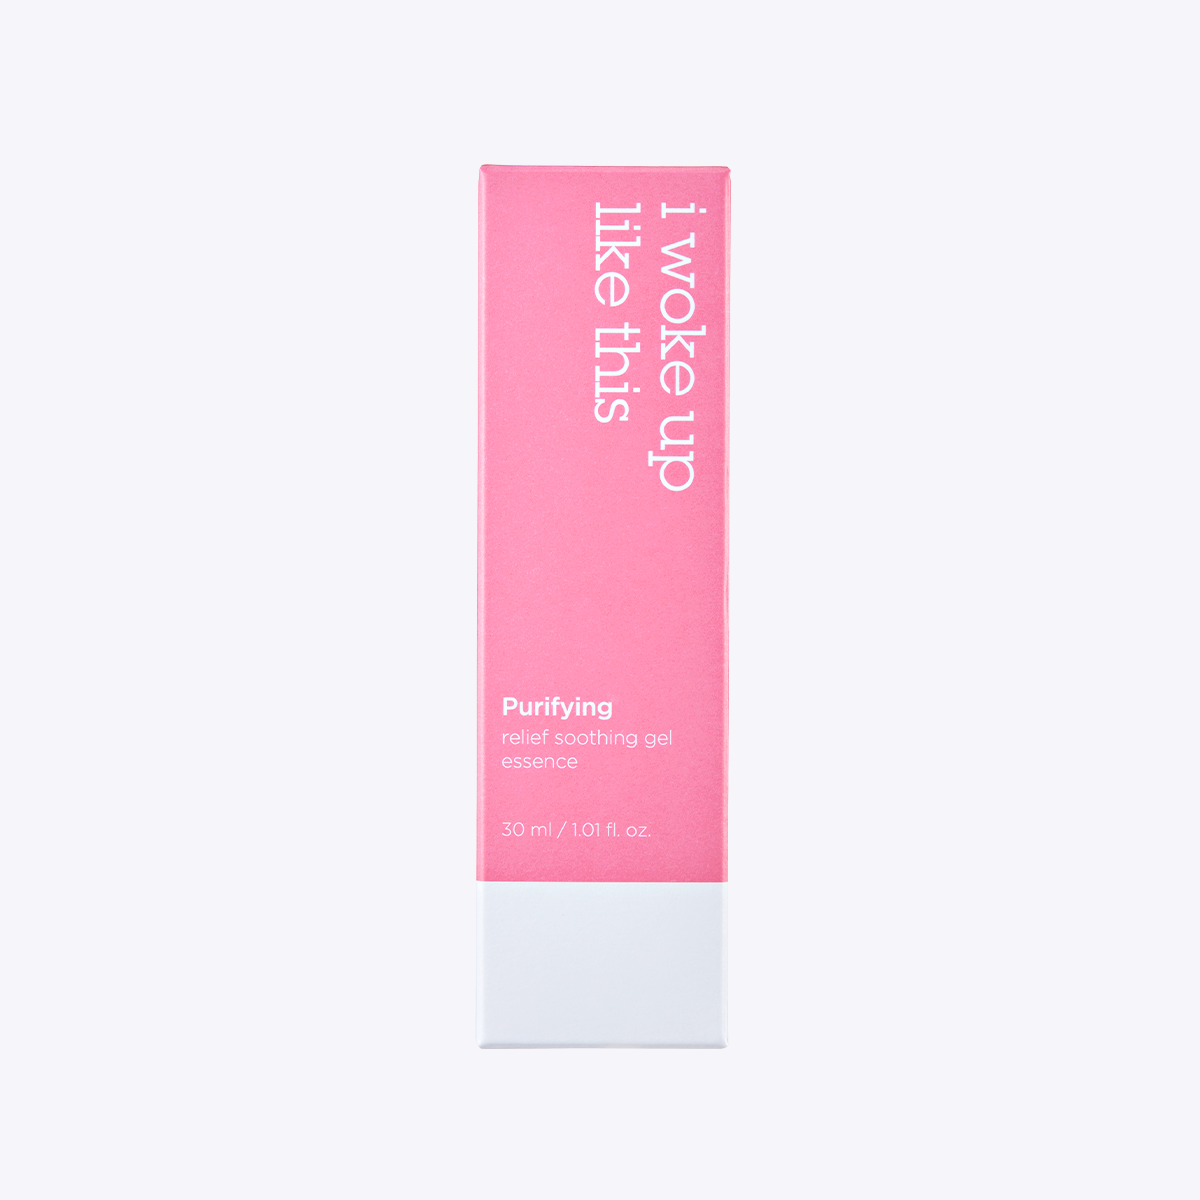 Purifying Relief Soothing Gel Essence